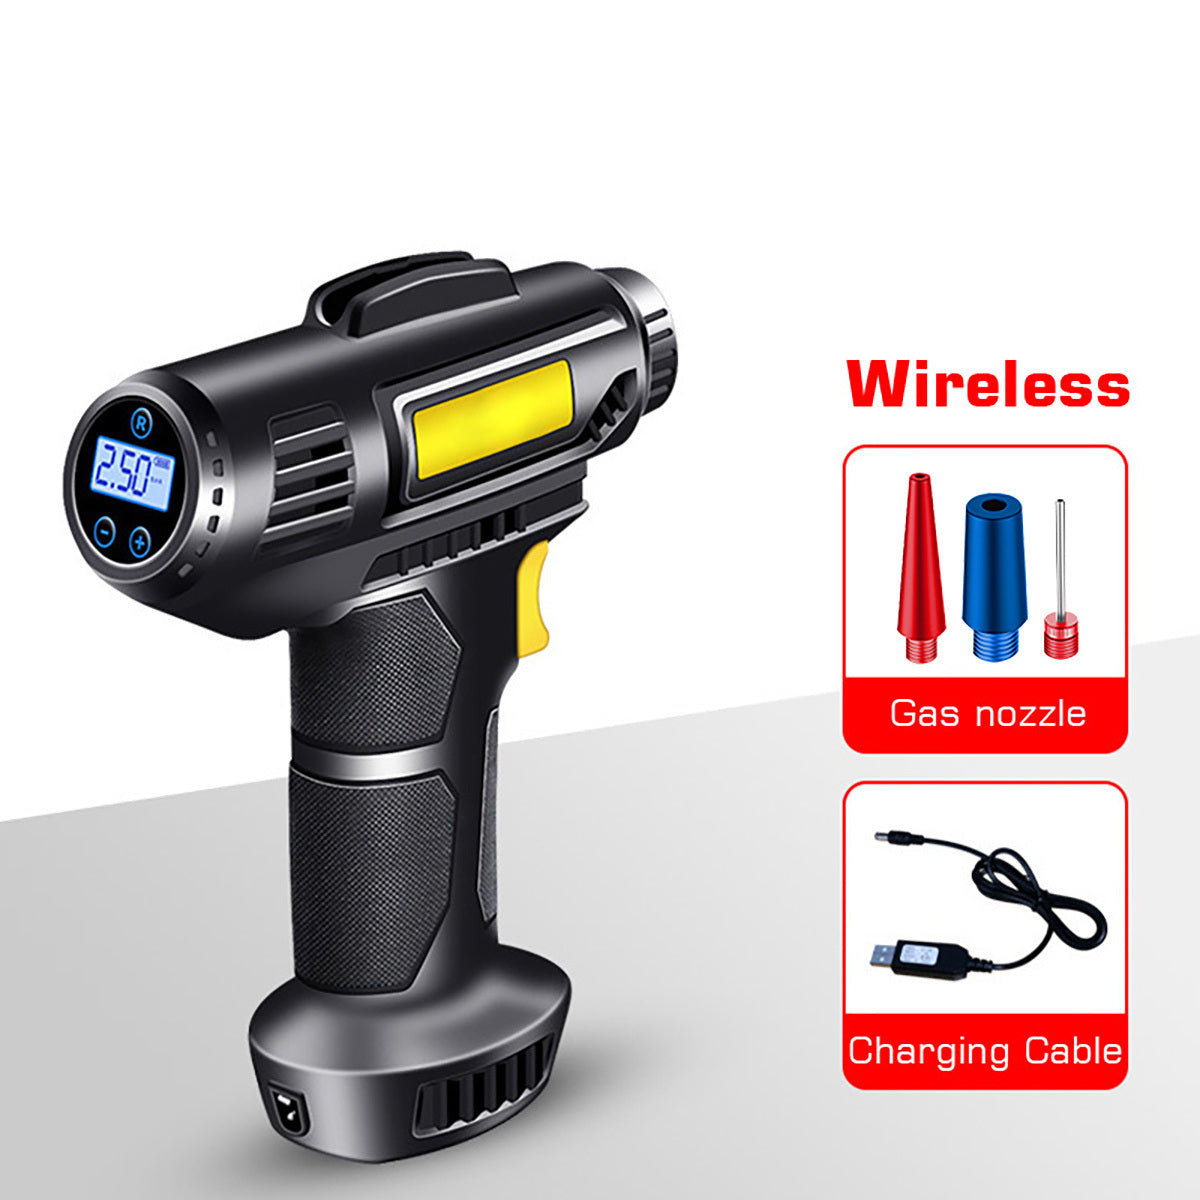 120W Portable Car Air Compressor; Wired/Wireless Handheld Car Inflatable Pump Electric; Automobiles Tire Inflator With LED Light For Car